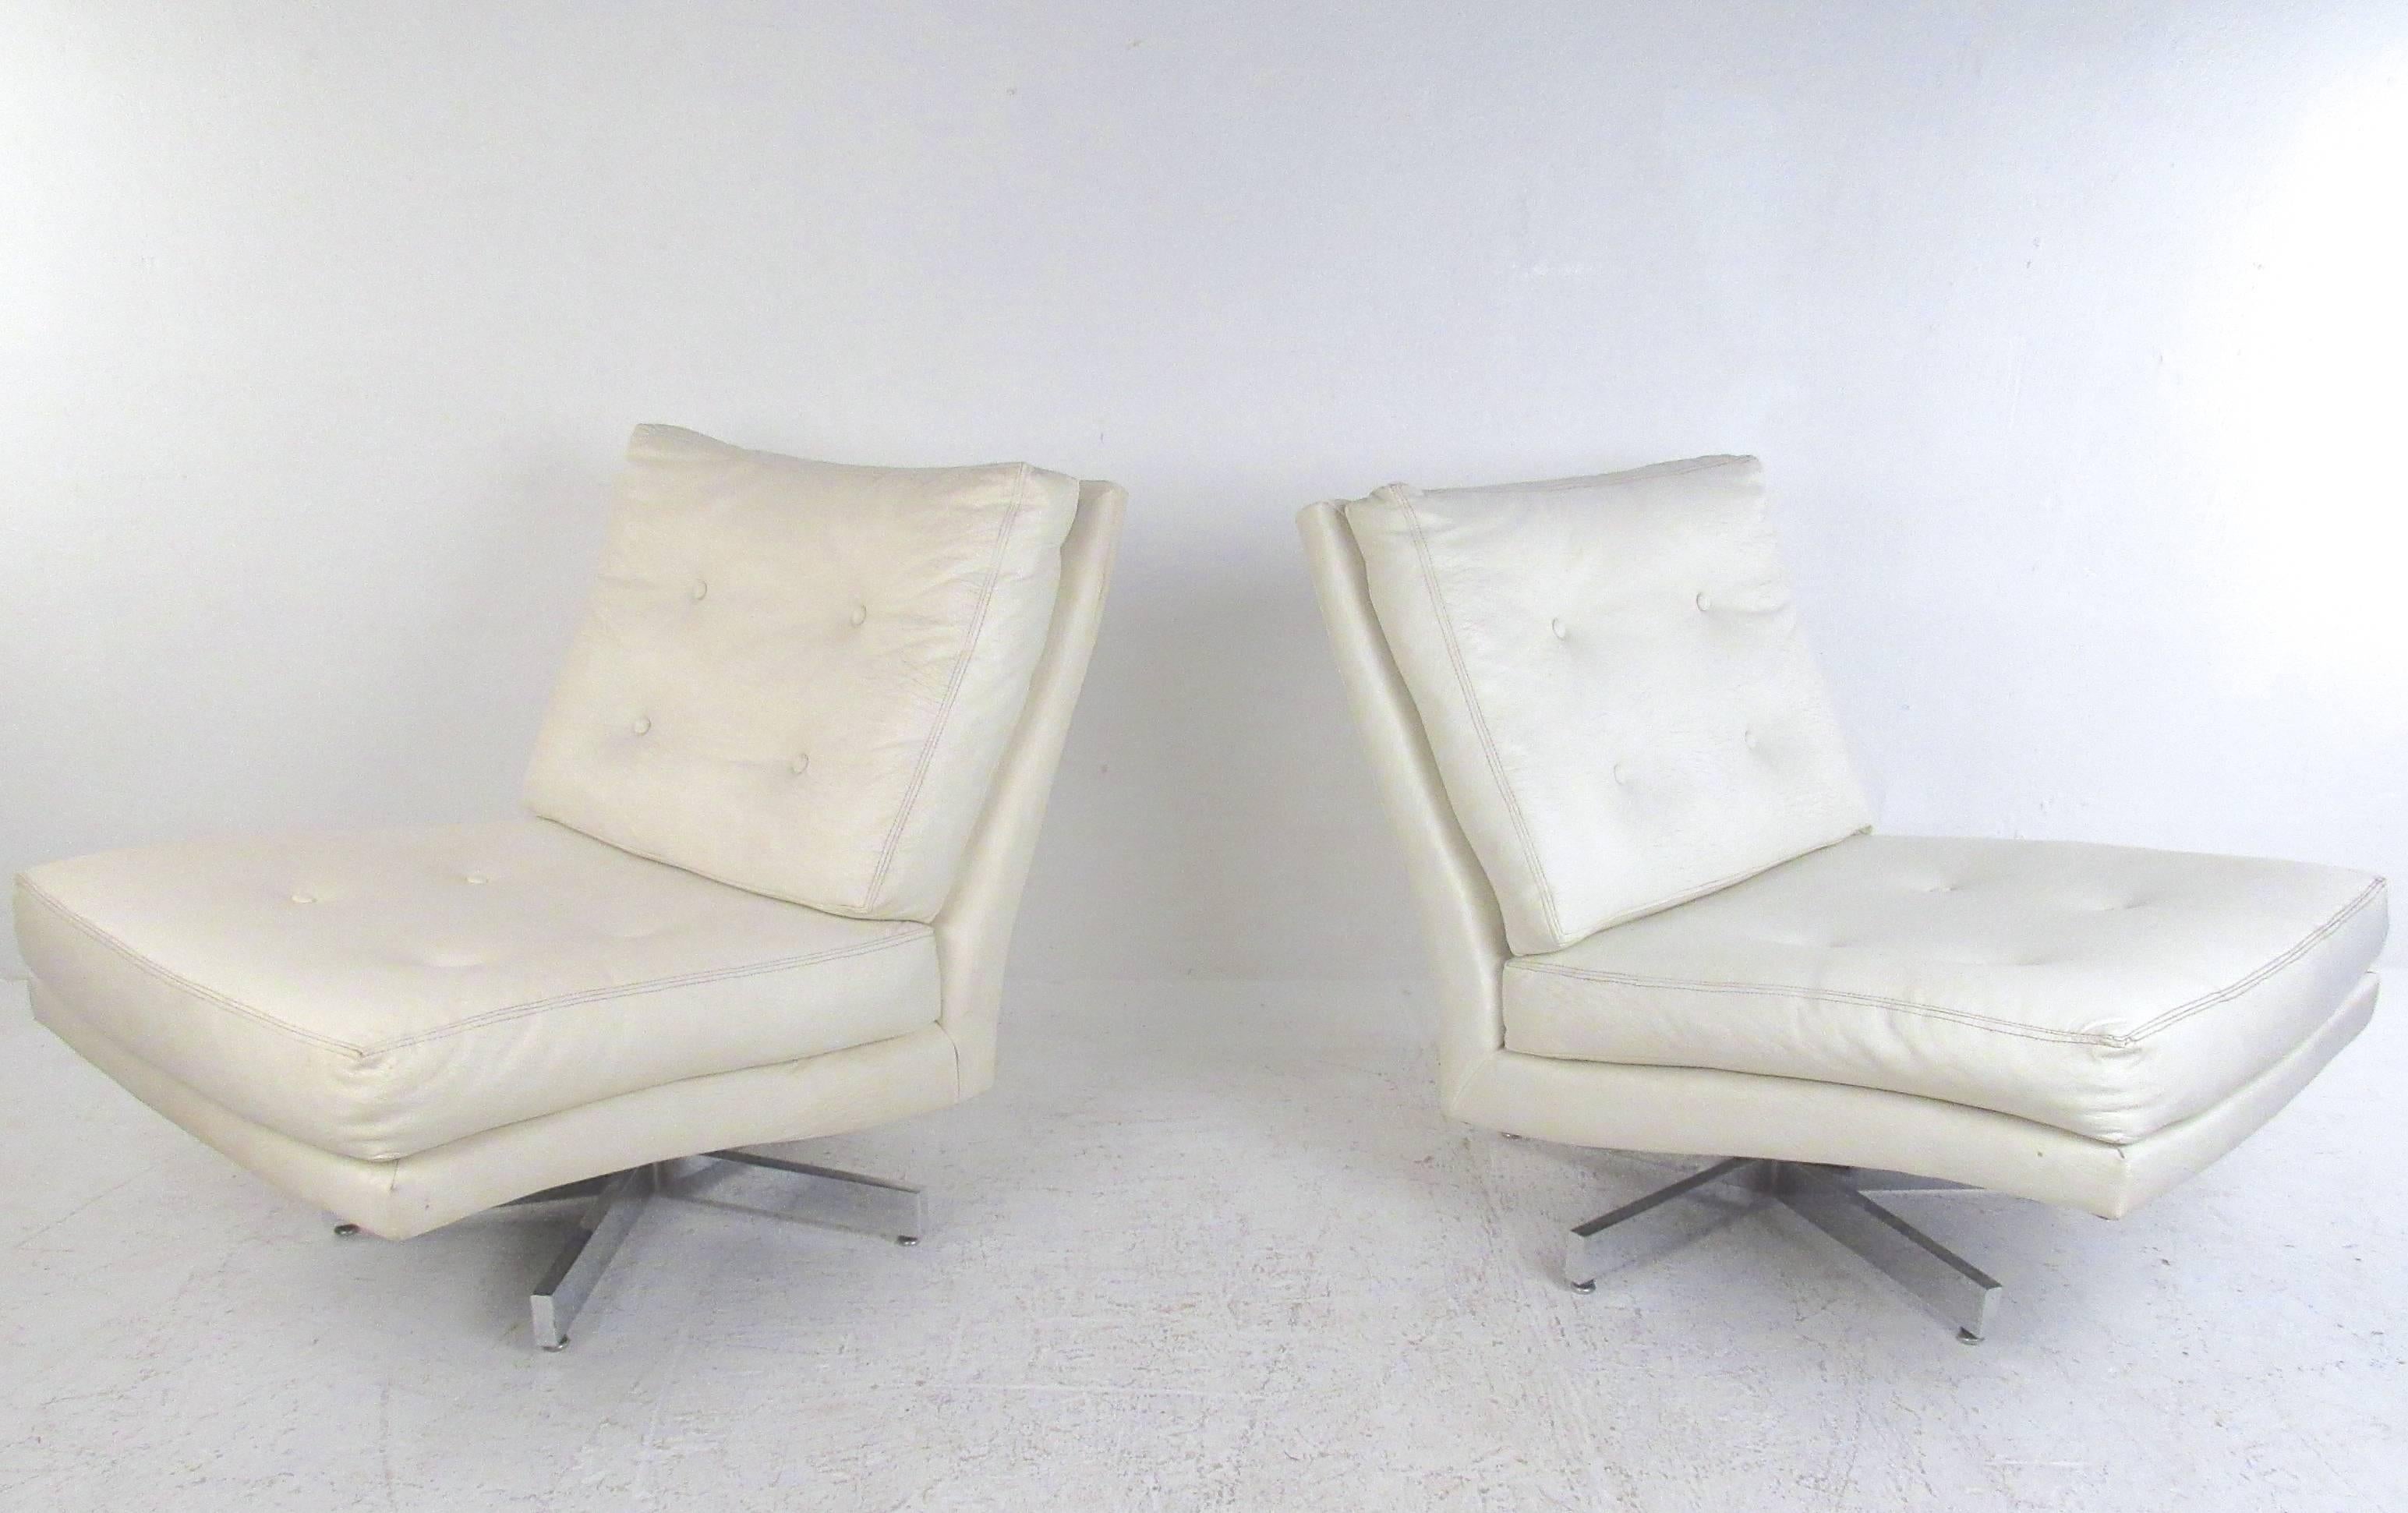 This beautiful pair of vintage vinyl swivel chairs for Thayer Coggin feature the stylish Mid-Century design of Milo Baughman. Tufted seats, slipper style design, and chrome swivel base add to the charm of the pair. Original tags still intact,